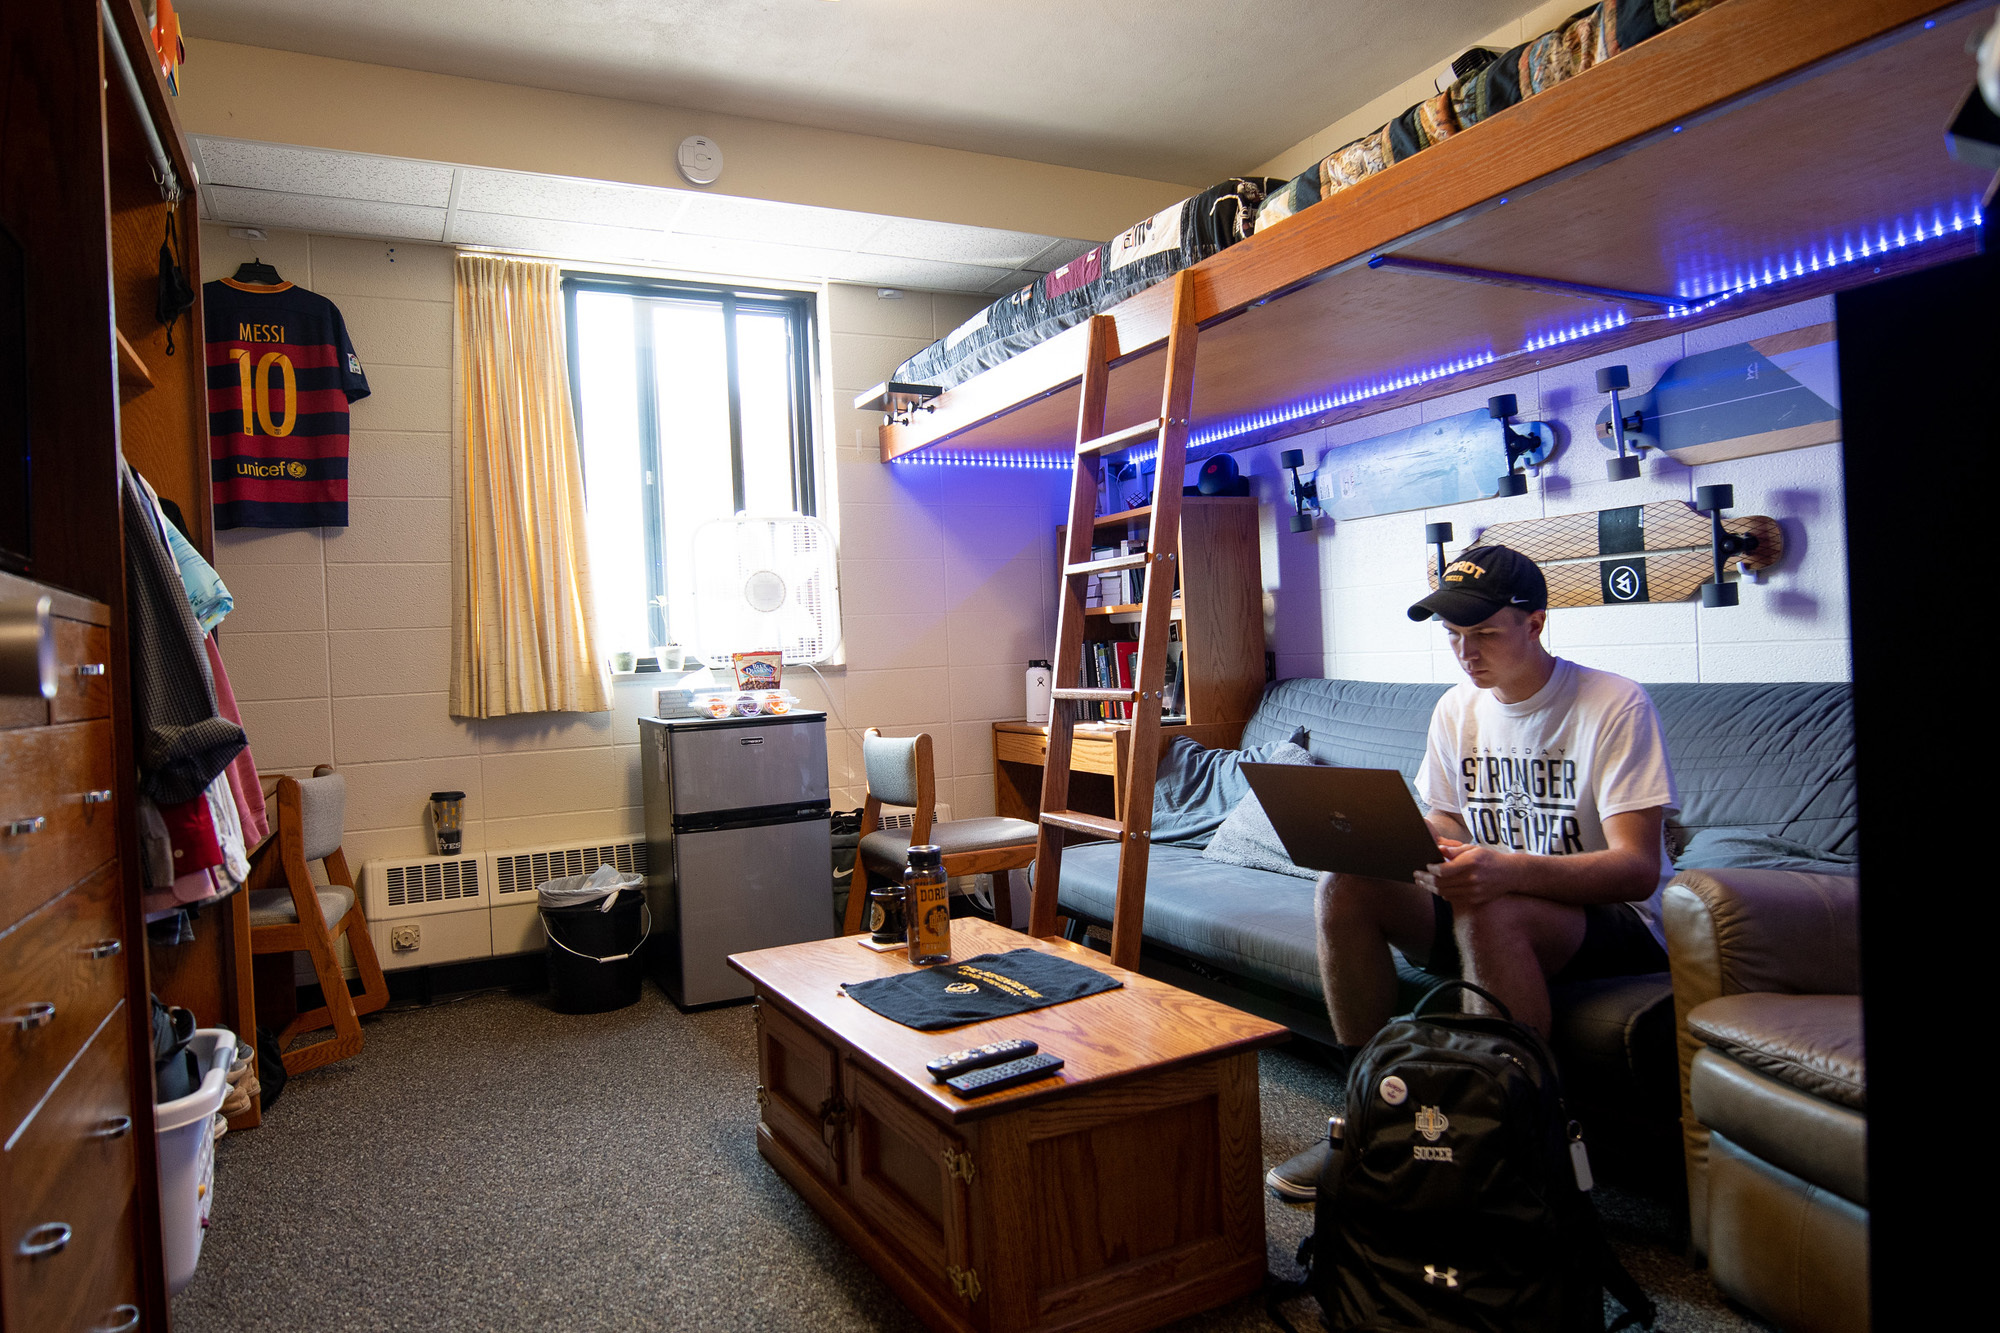 A Dordt student in his dorm room studying